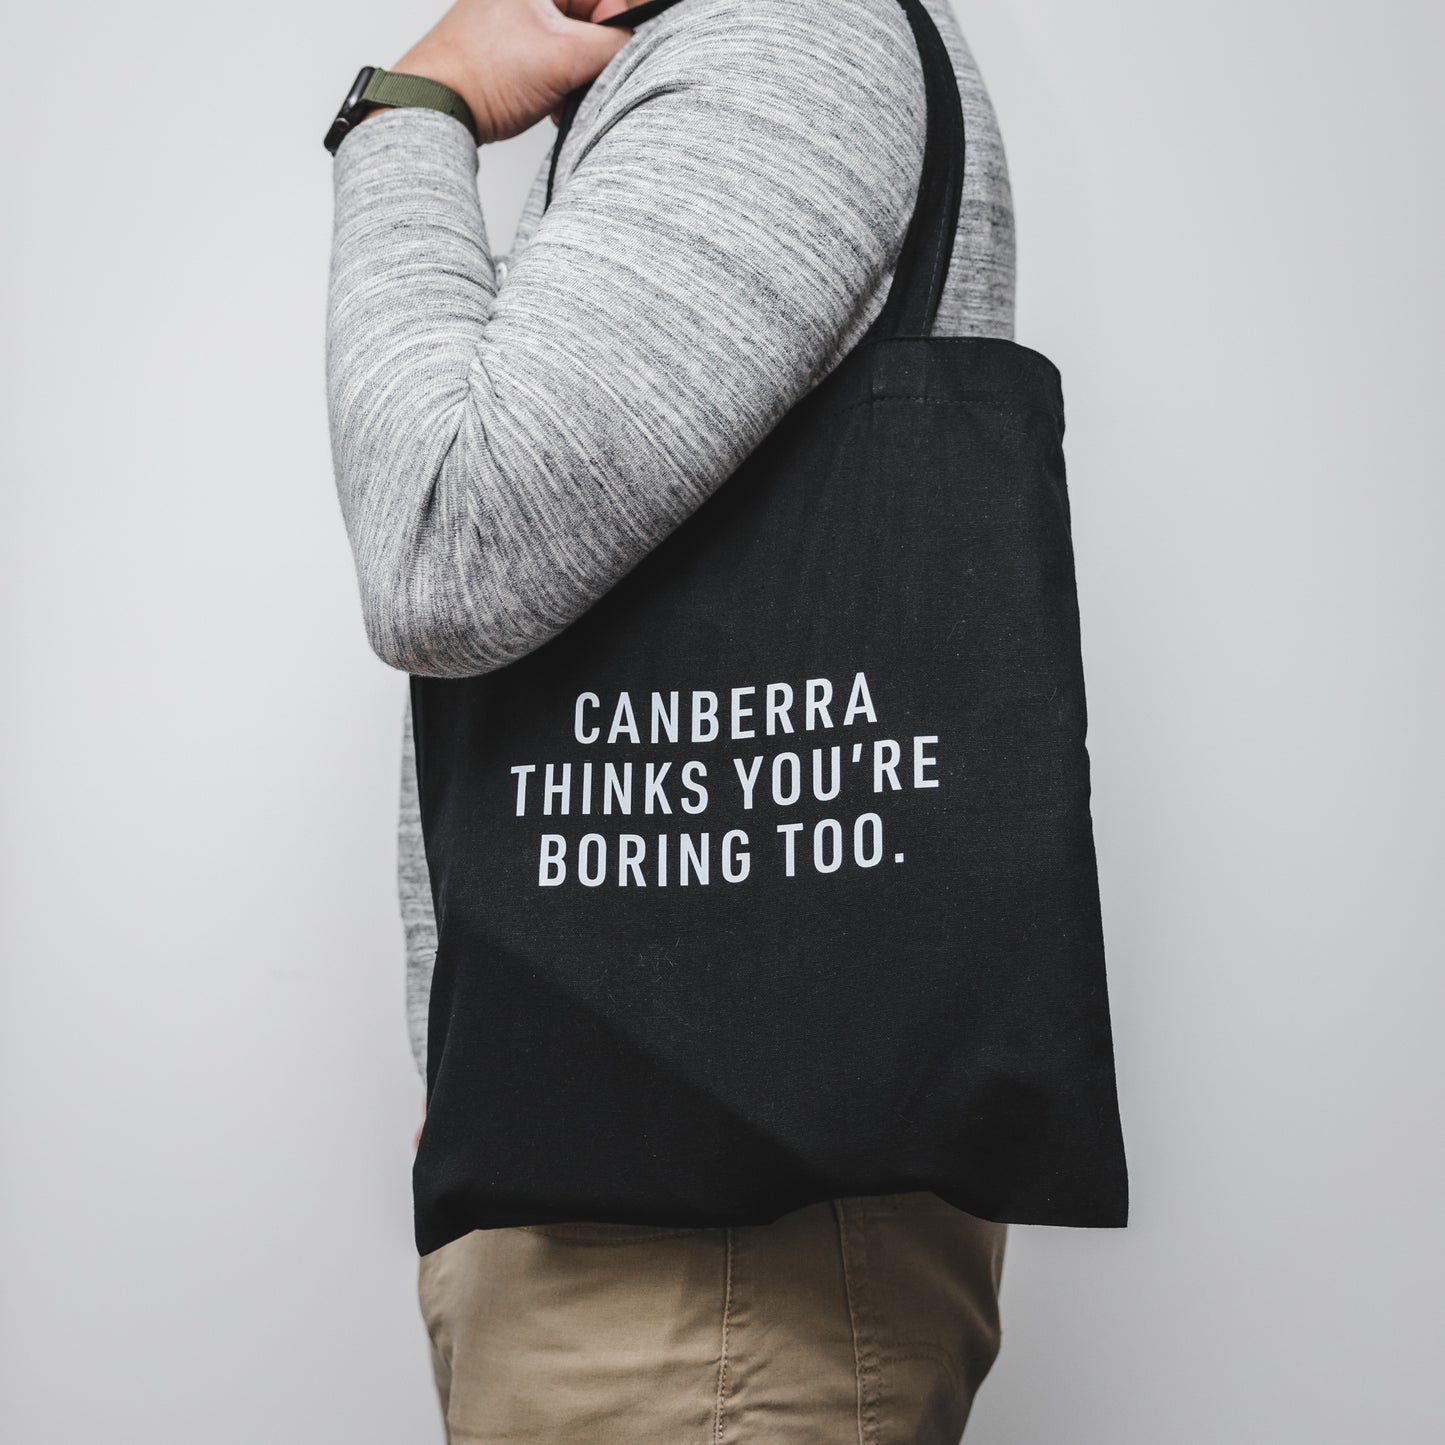 Canberra Thinks You're Boring Too Tote Bag